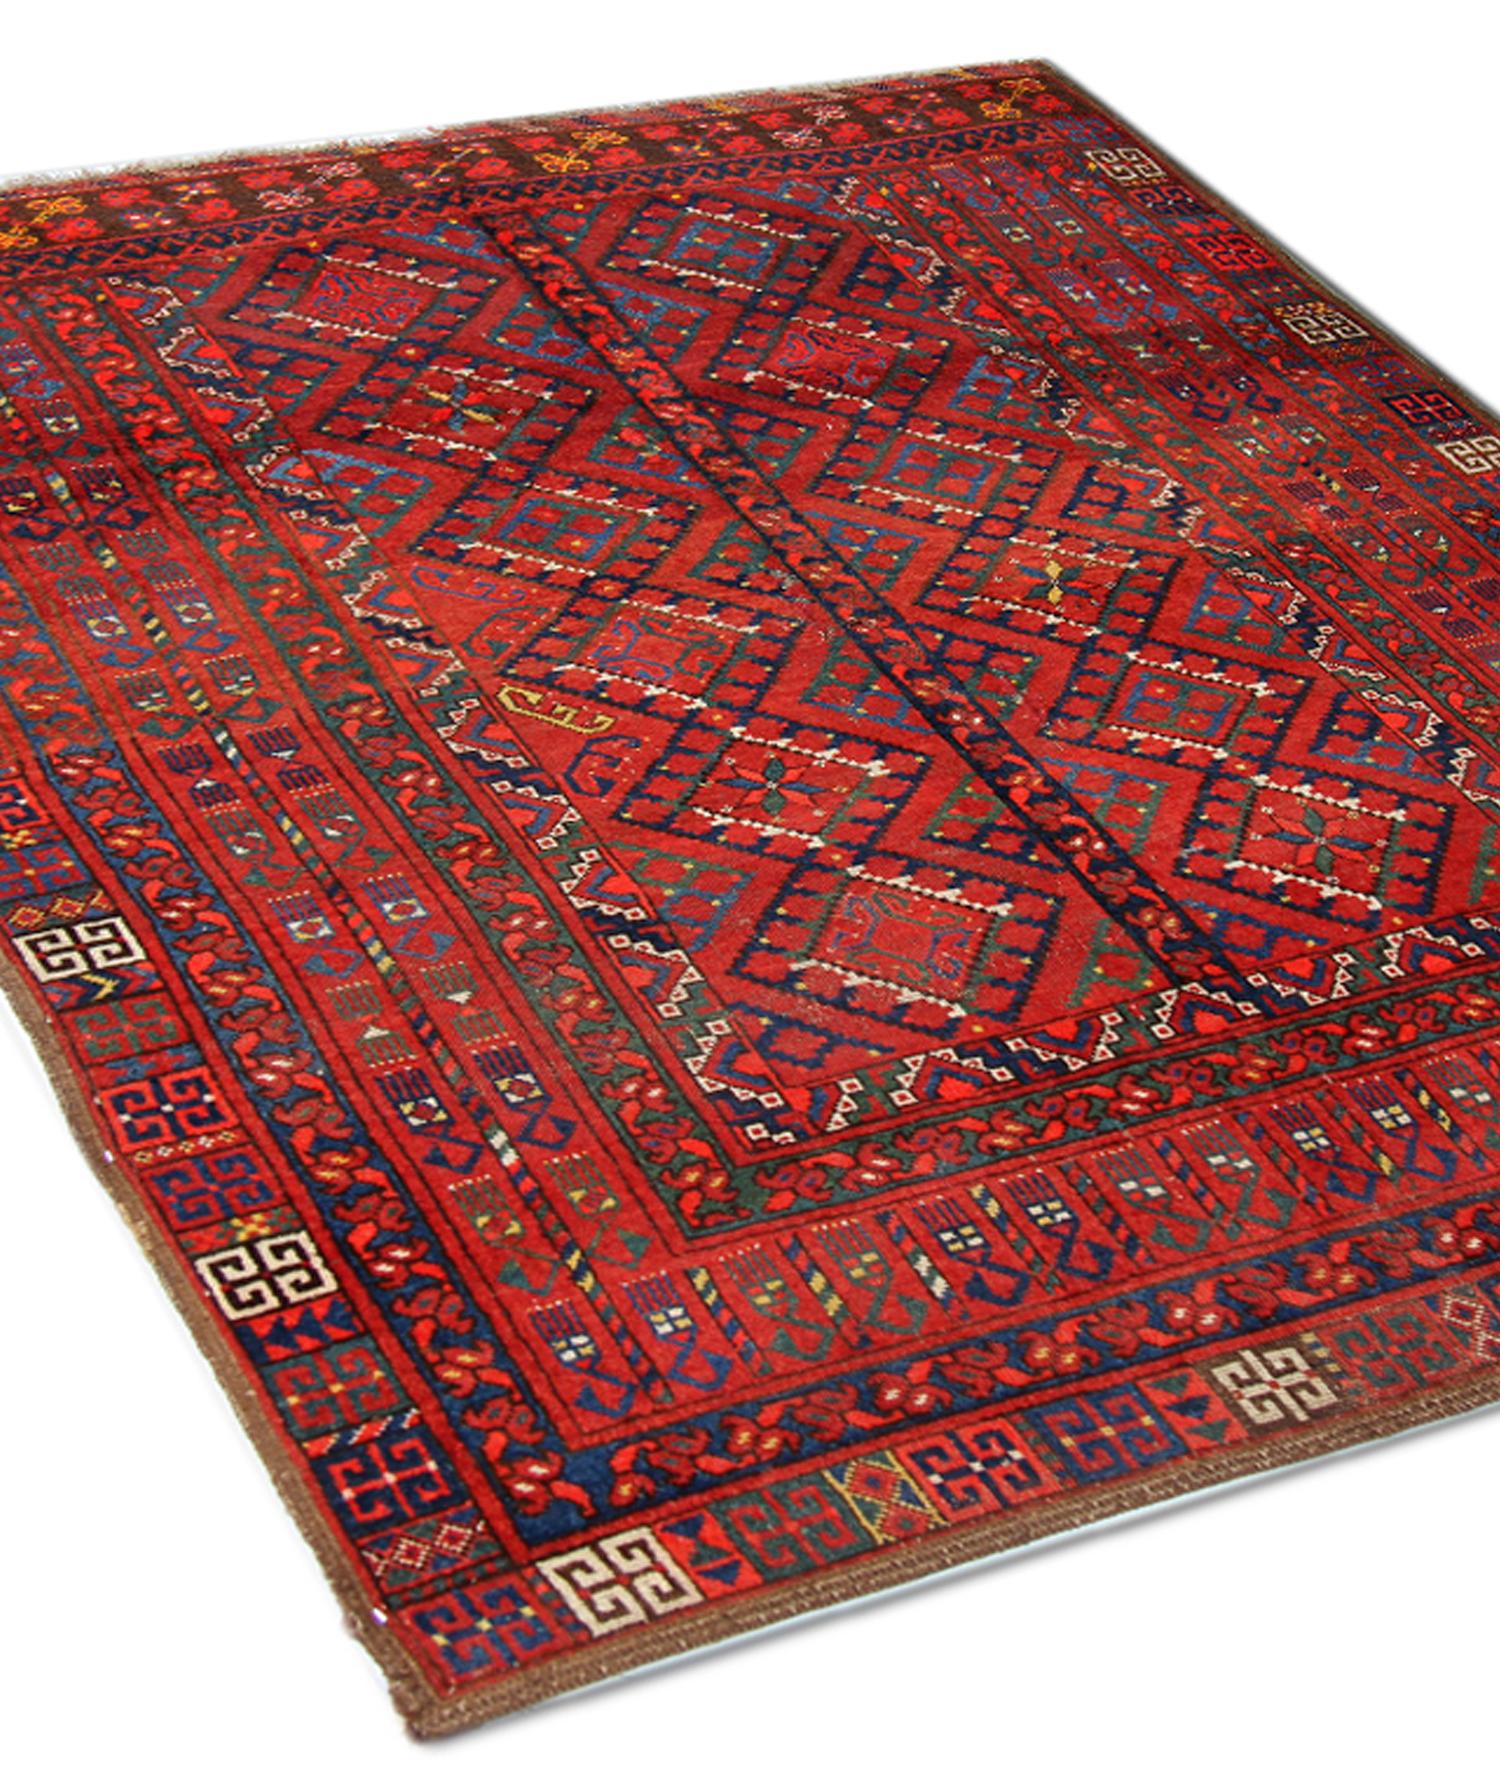 This wool rug is an impressive example of l hand-knotted carpets hand-woven in the early 20th century. It features a bright red background that contrasts beautifully with the geometric details woven in green and blue. The design features a geometric